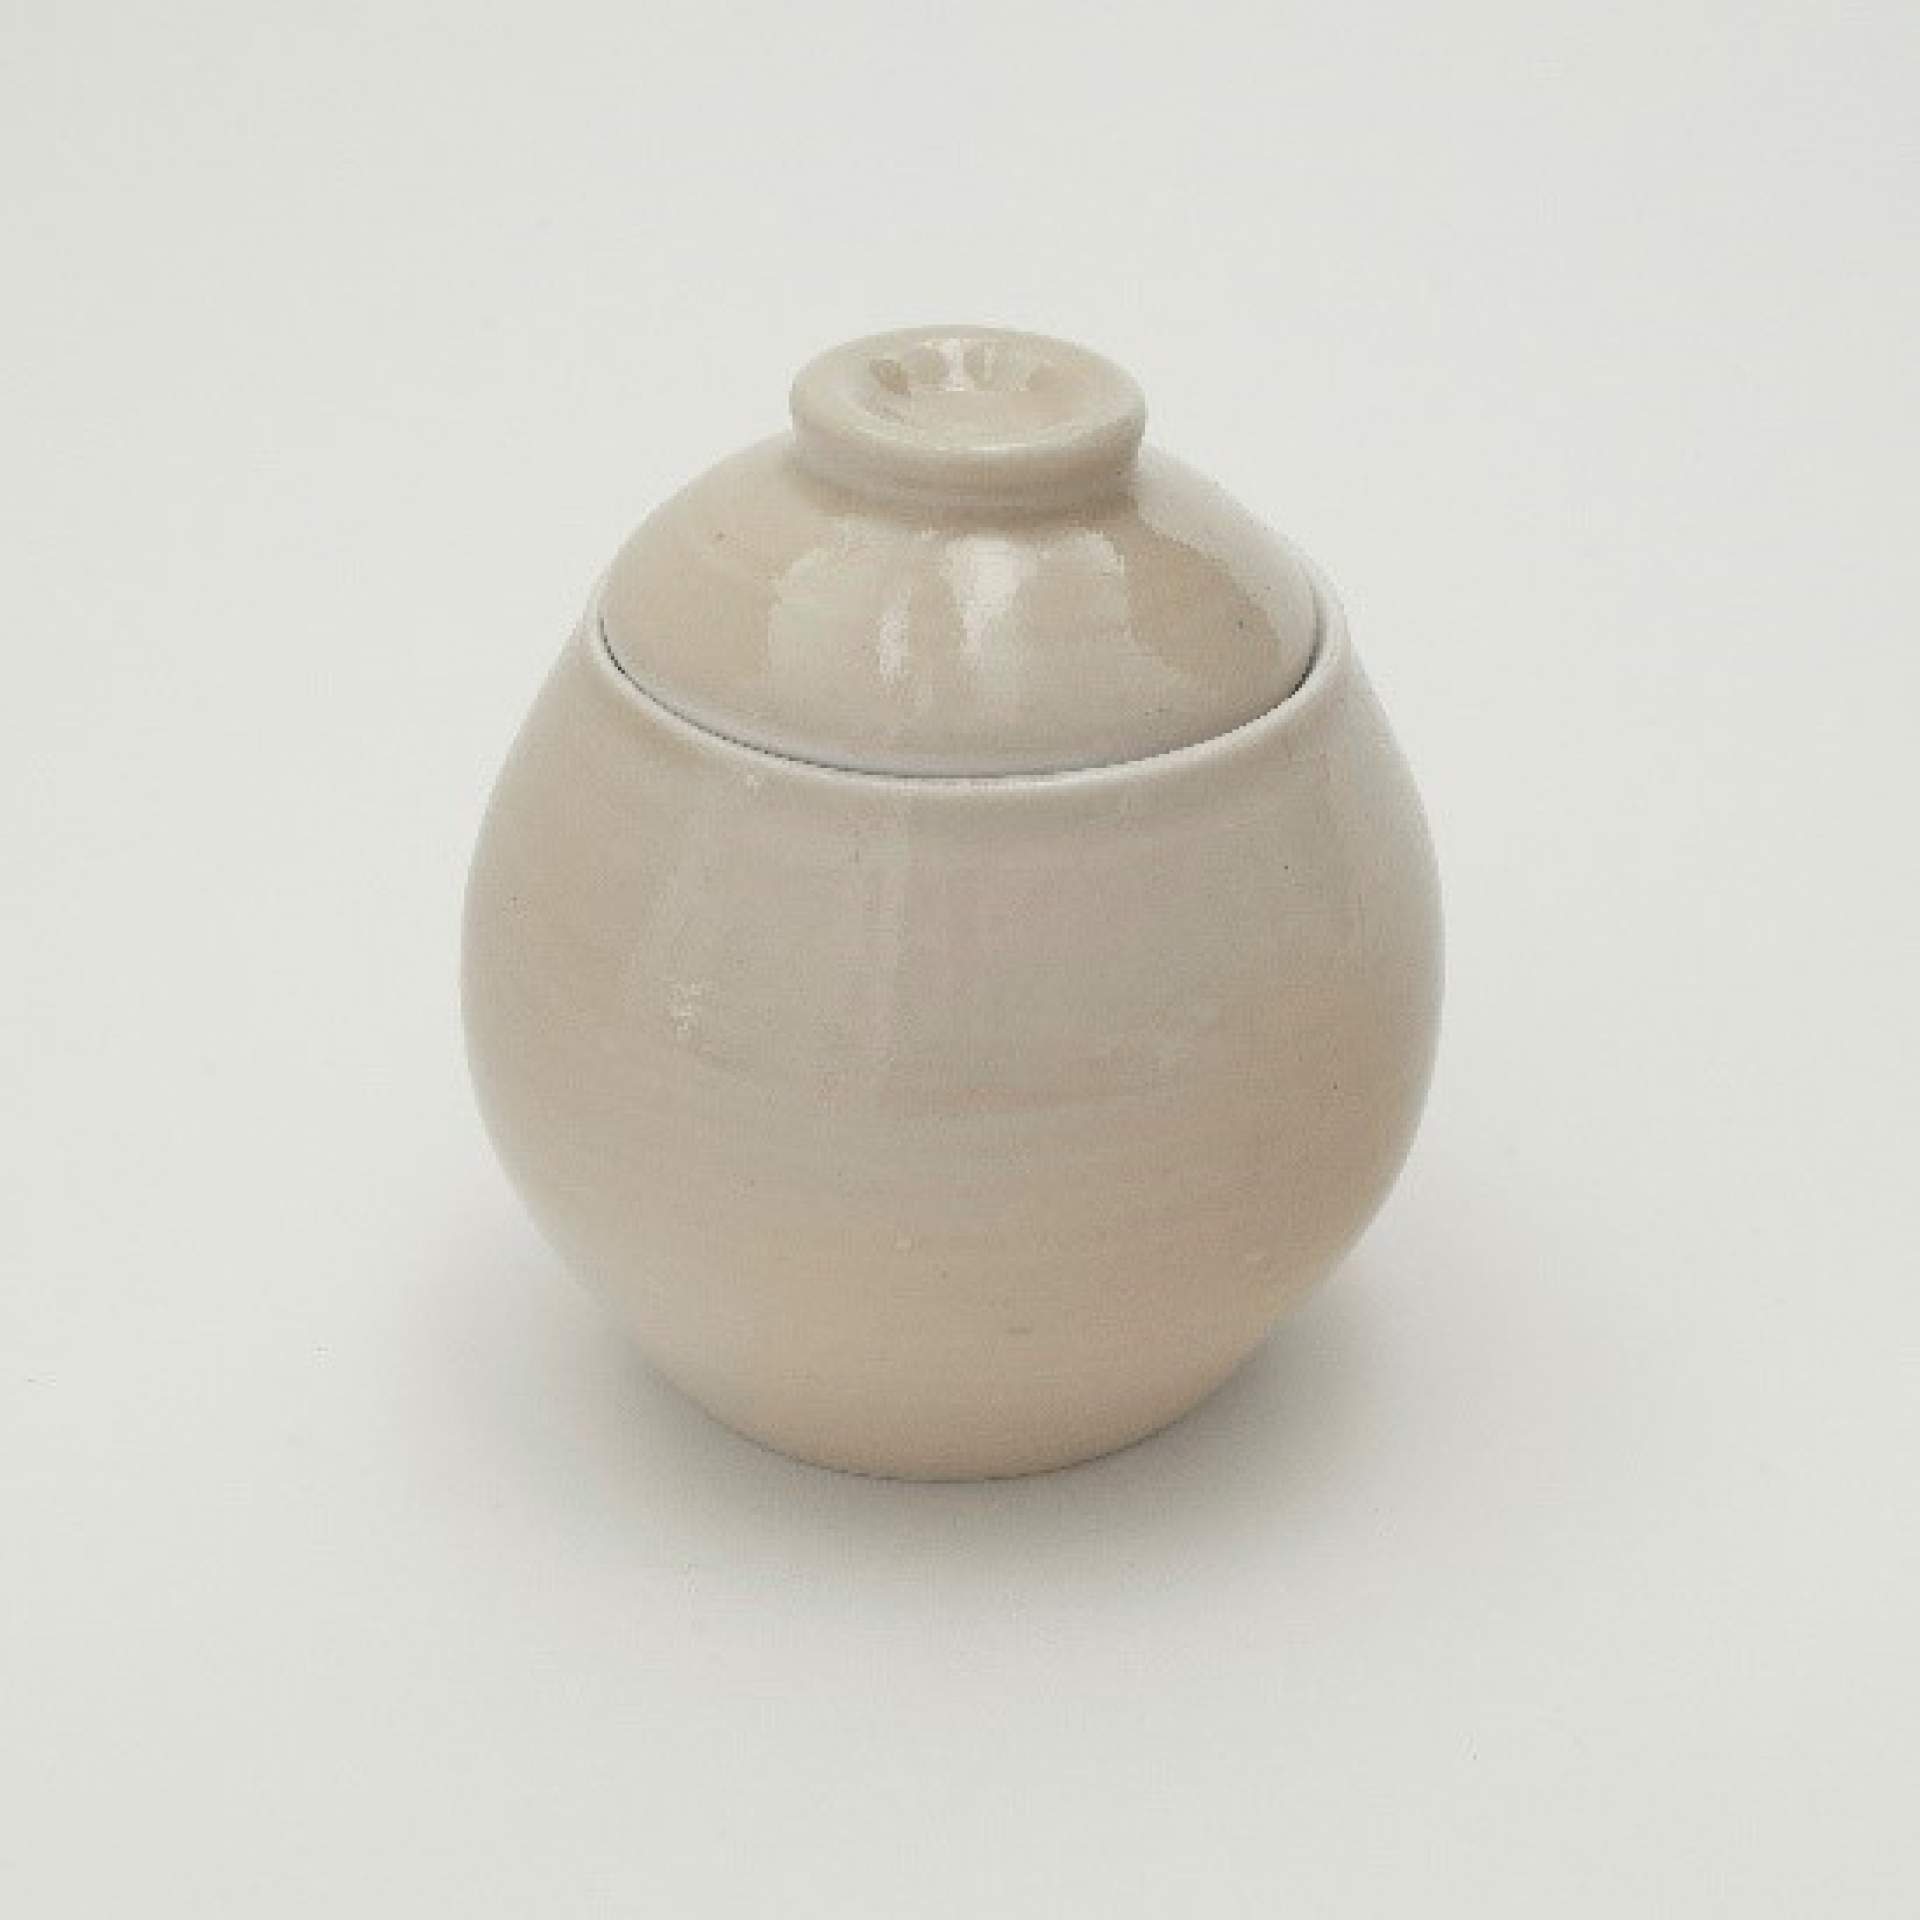 Untitled Covered Pot